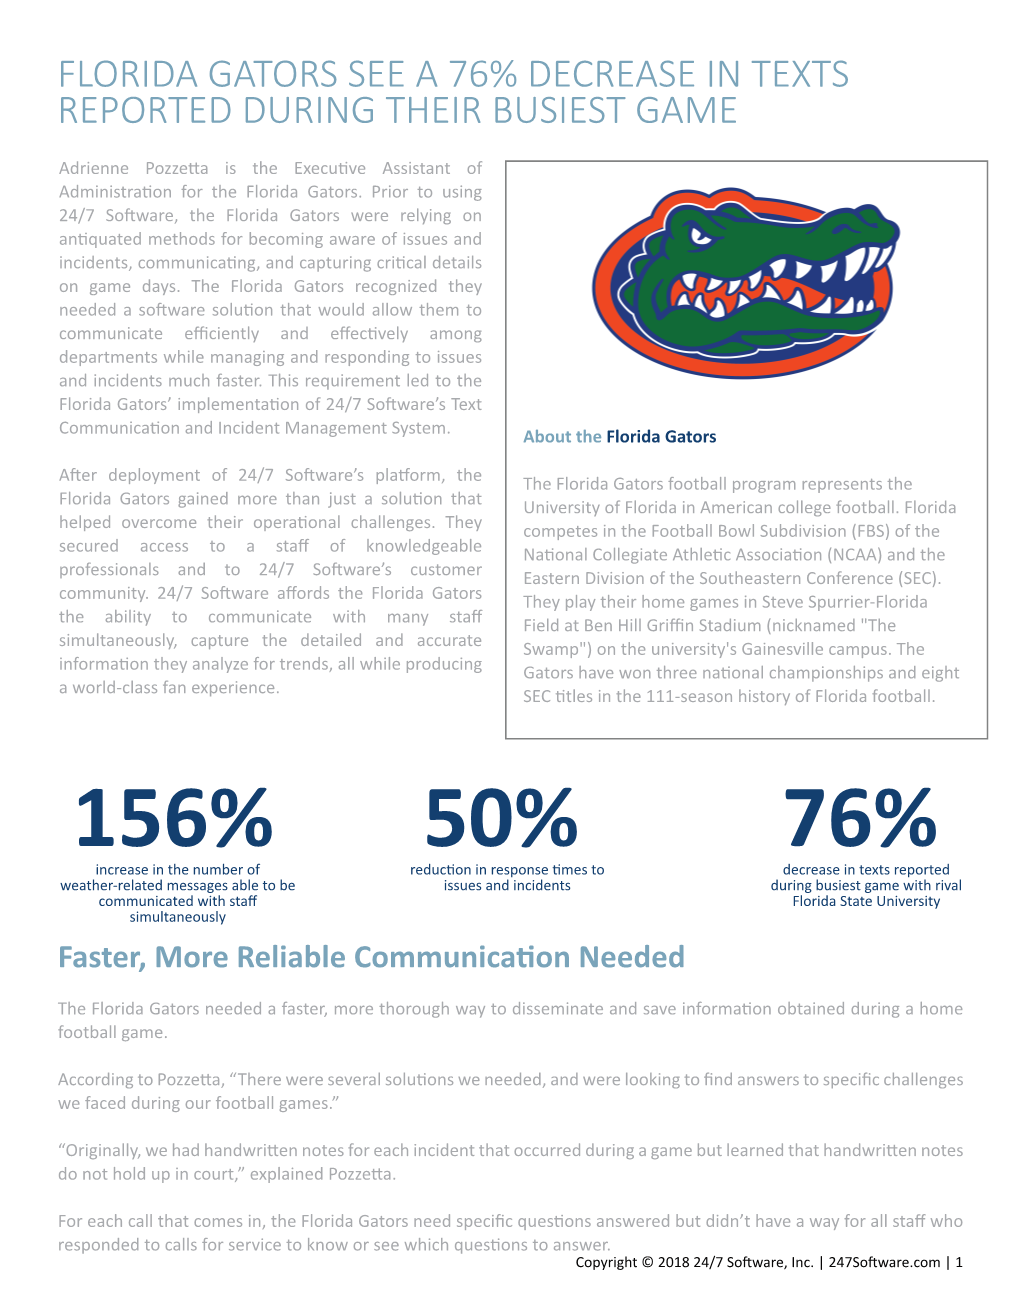 Florida Gators See a 76% Decrease in Texts Reported During Their Busiest Game